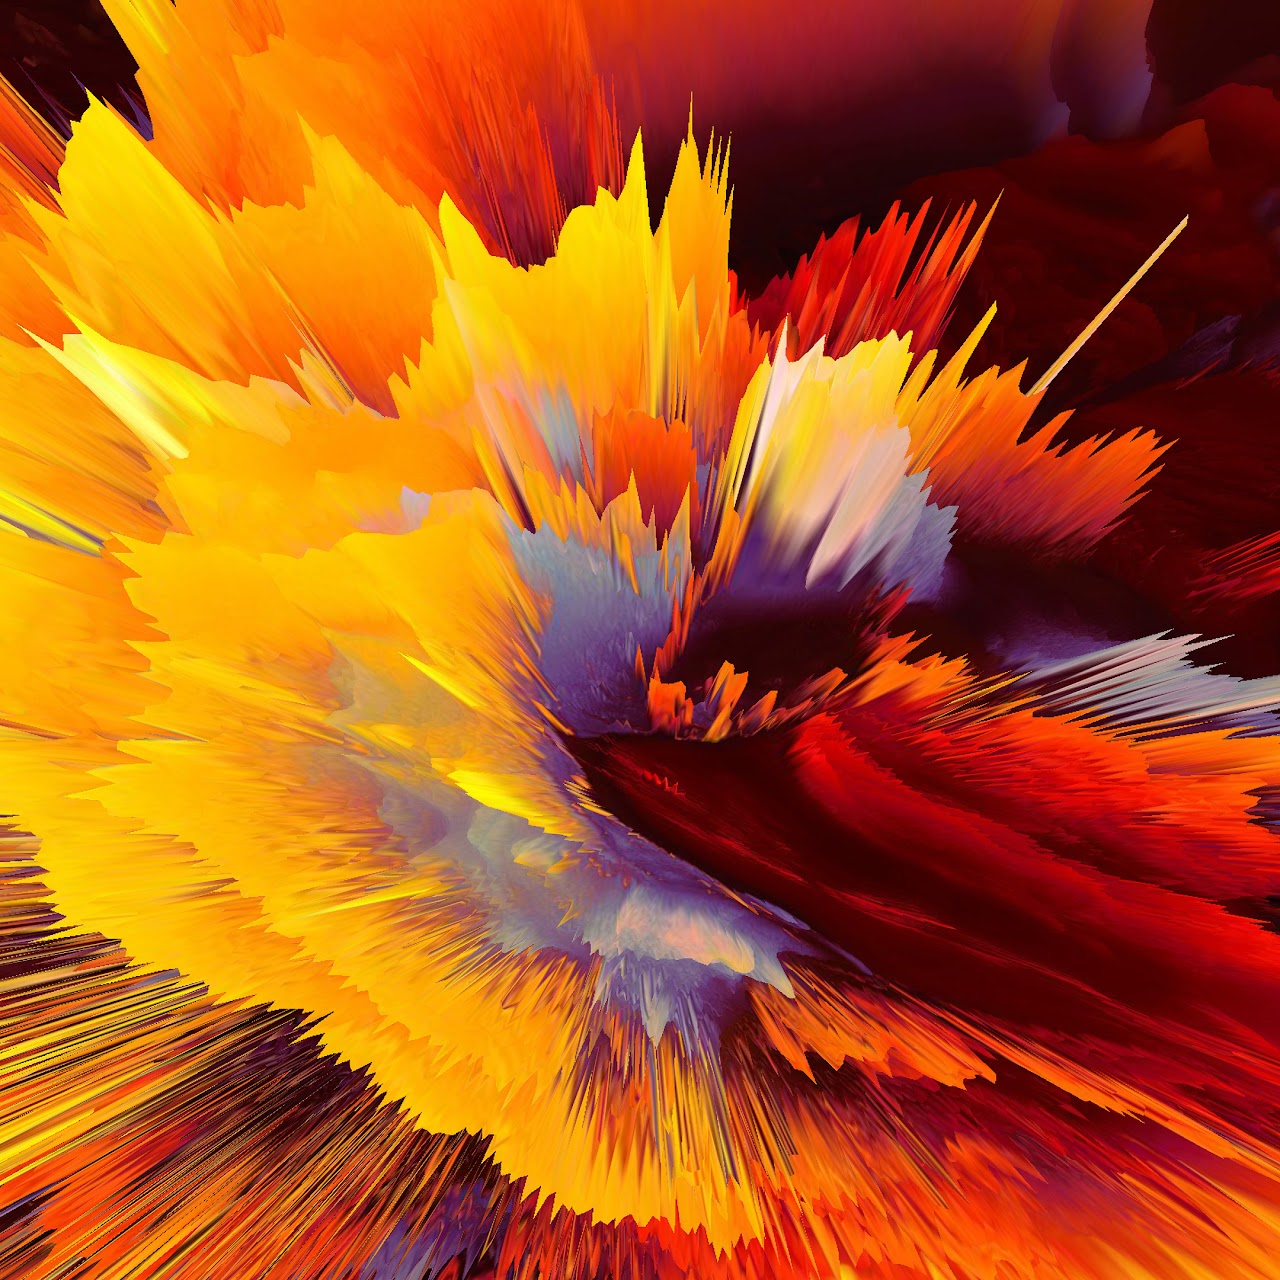 Abstract, Colorful, Explosion, 4K, 3840x2160, #30 Wallpaper PC Desktop